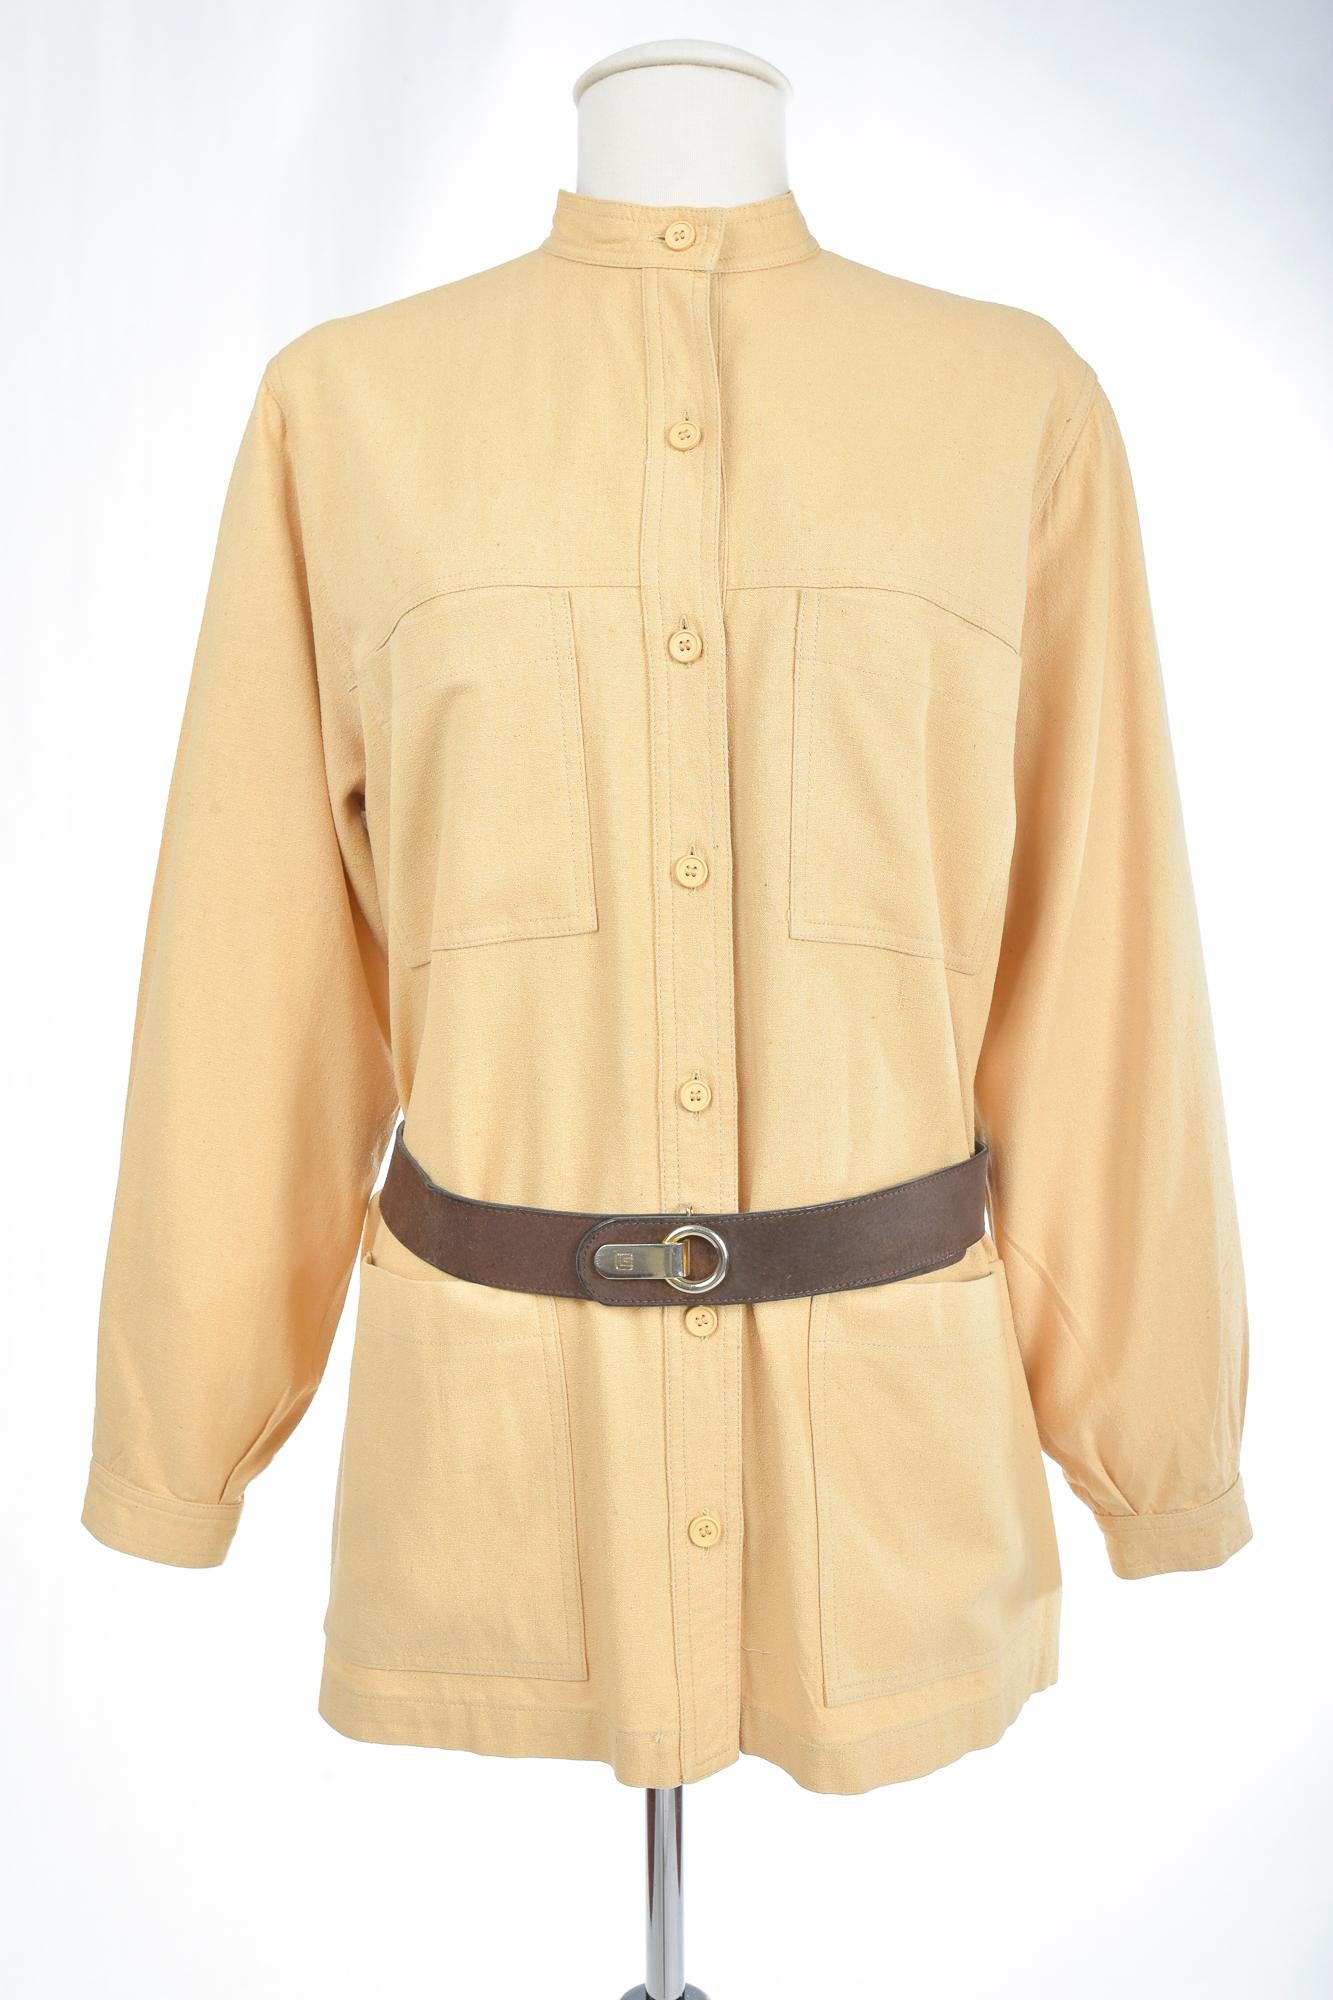 A French Safari Yellow Saharienne Blouse by Guy Laroche Paris Circa 1975-1980 In Good Condition For Sale In Toulon, FR